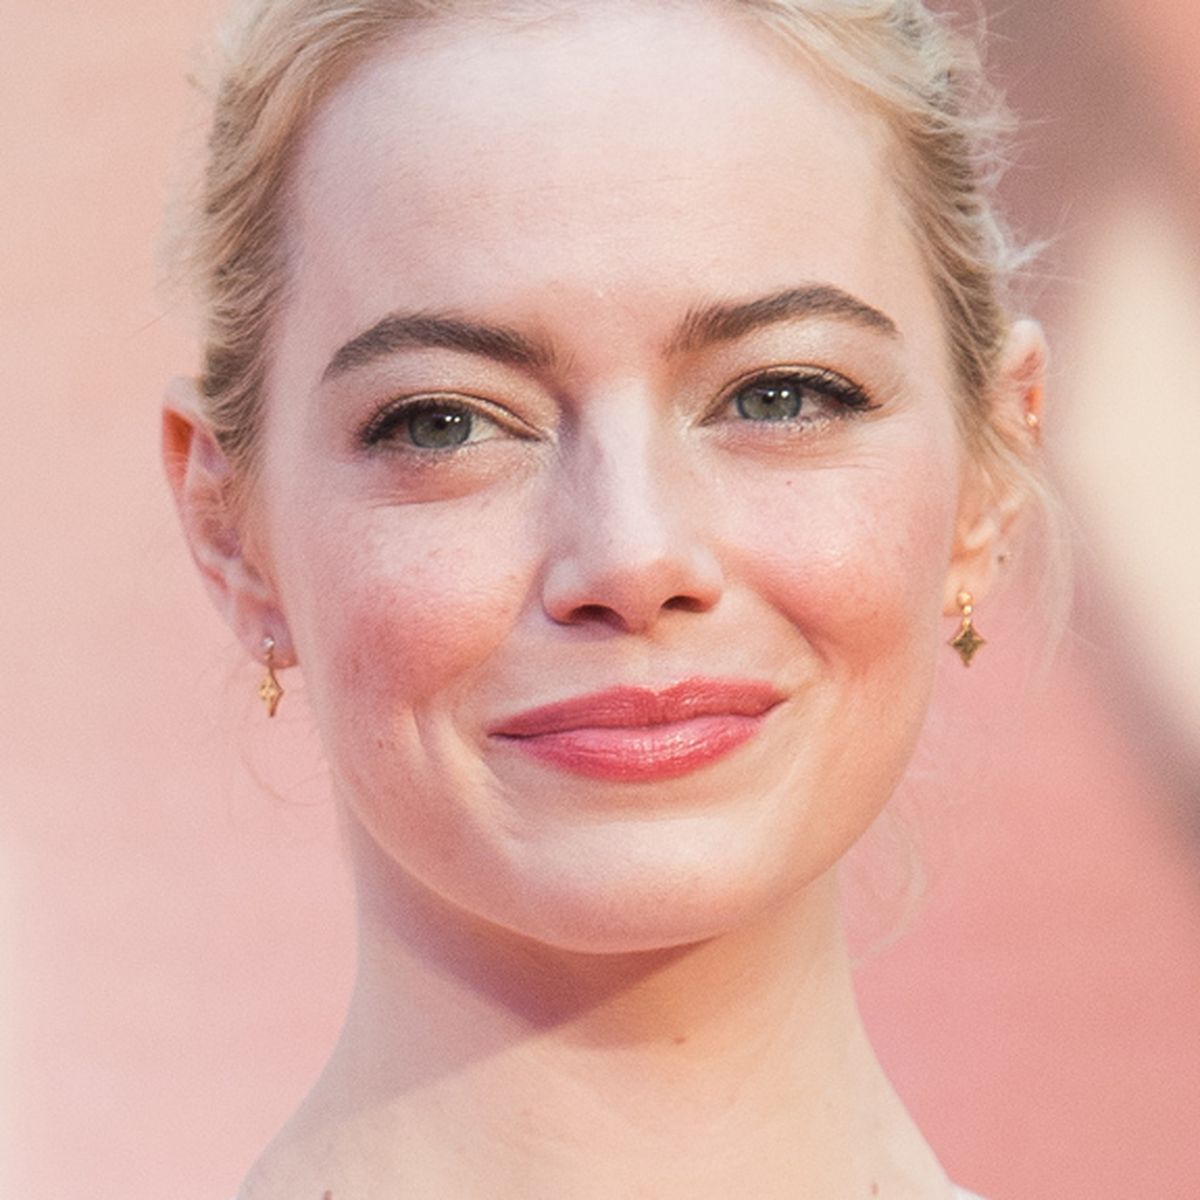 Emma Stone signed as new face of Louis Vuitton – The Upcoming